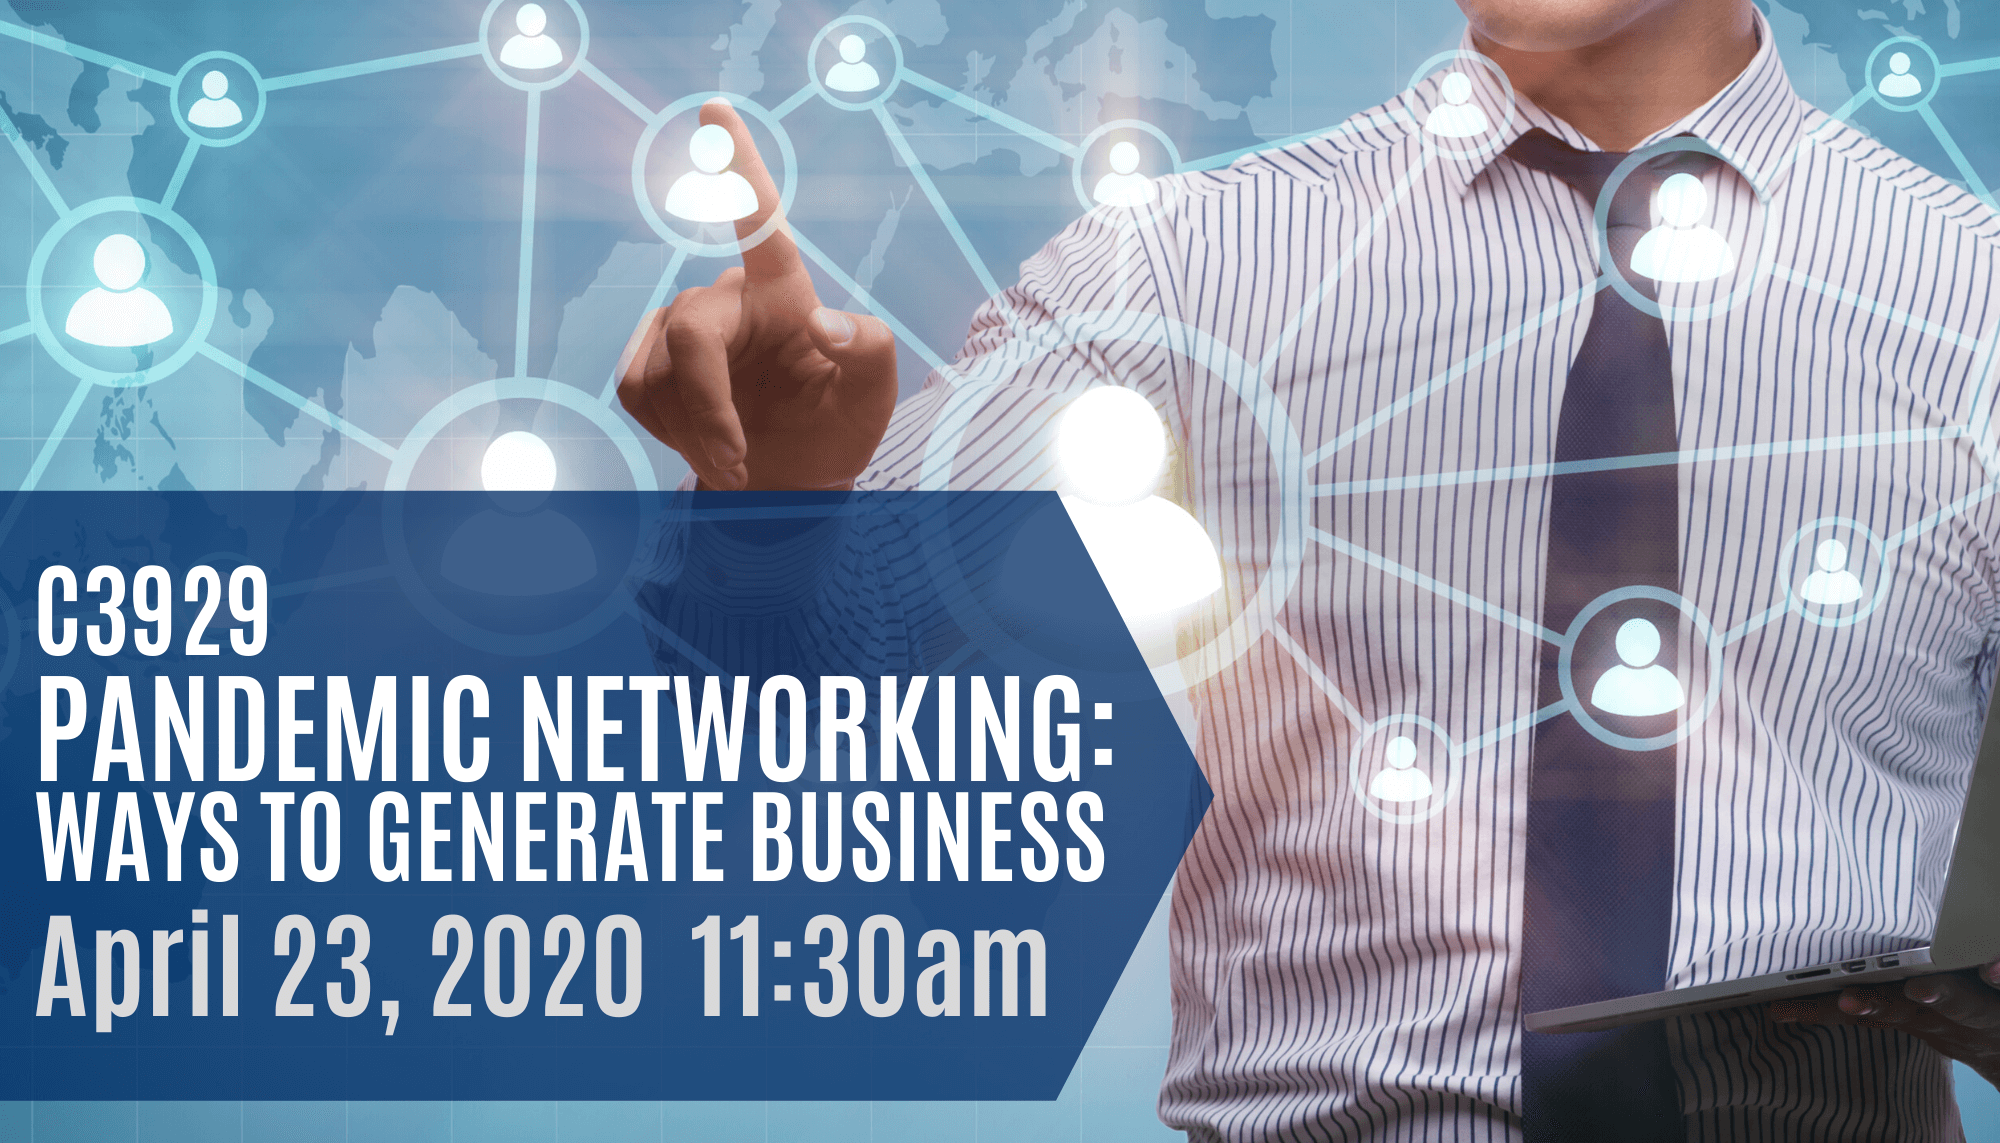 Pandemic Networking Event Invitation